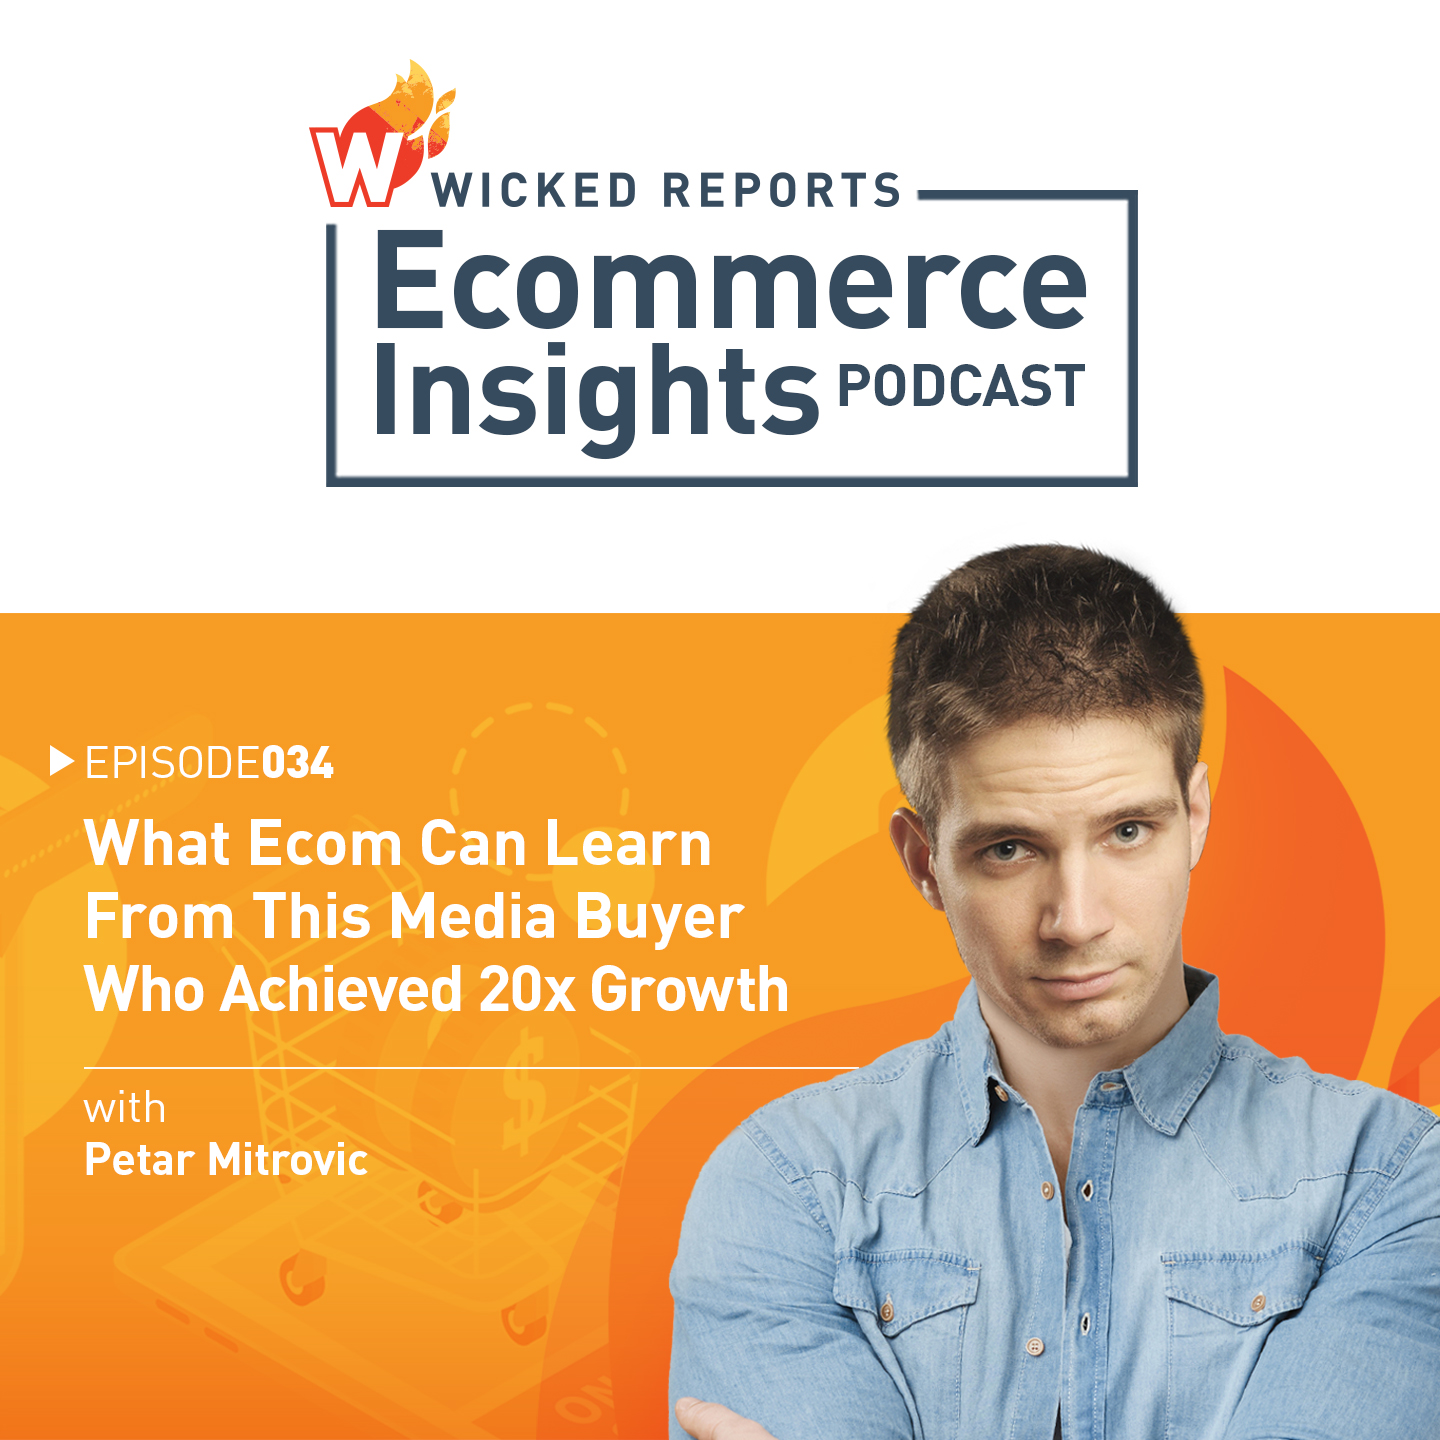 What Ecom Can Learn from this Media Buyer Who Achieved 20x Growth with Petar Mitrovic